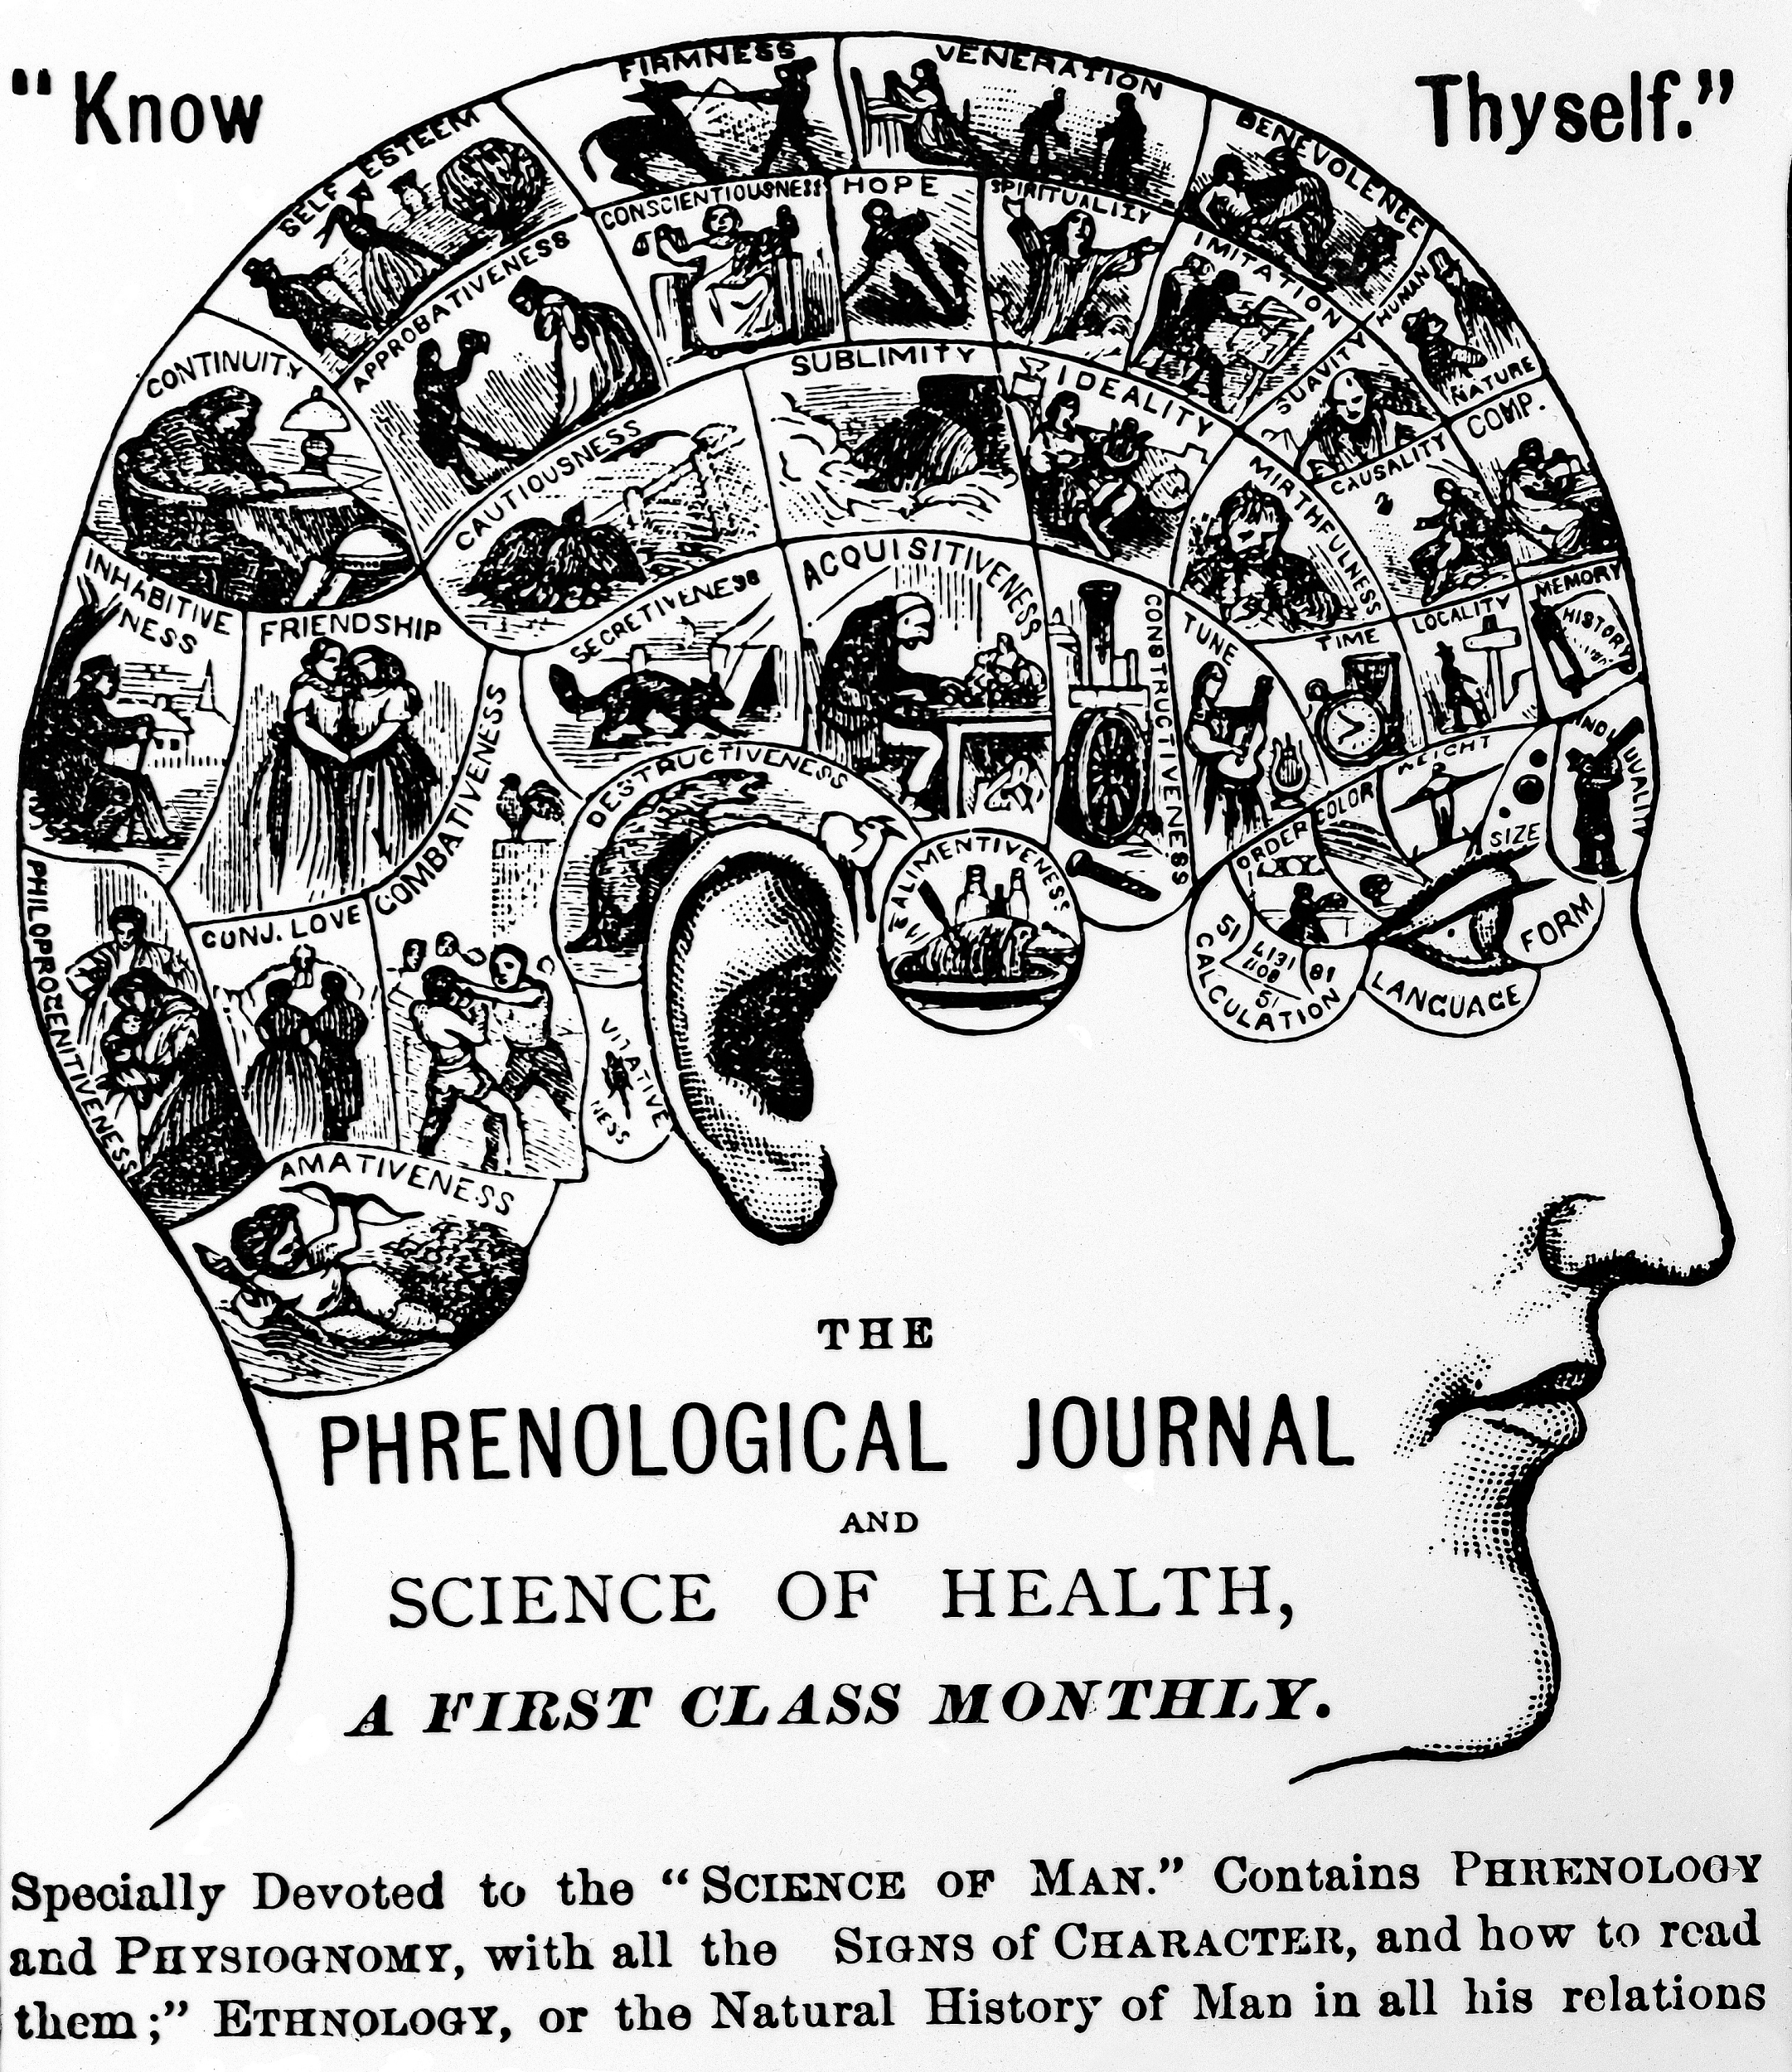 According to the early 19th century science of phrenology, units of personality could be reliably mapped onto units of the head